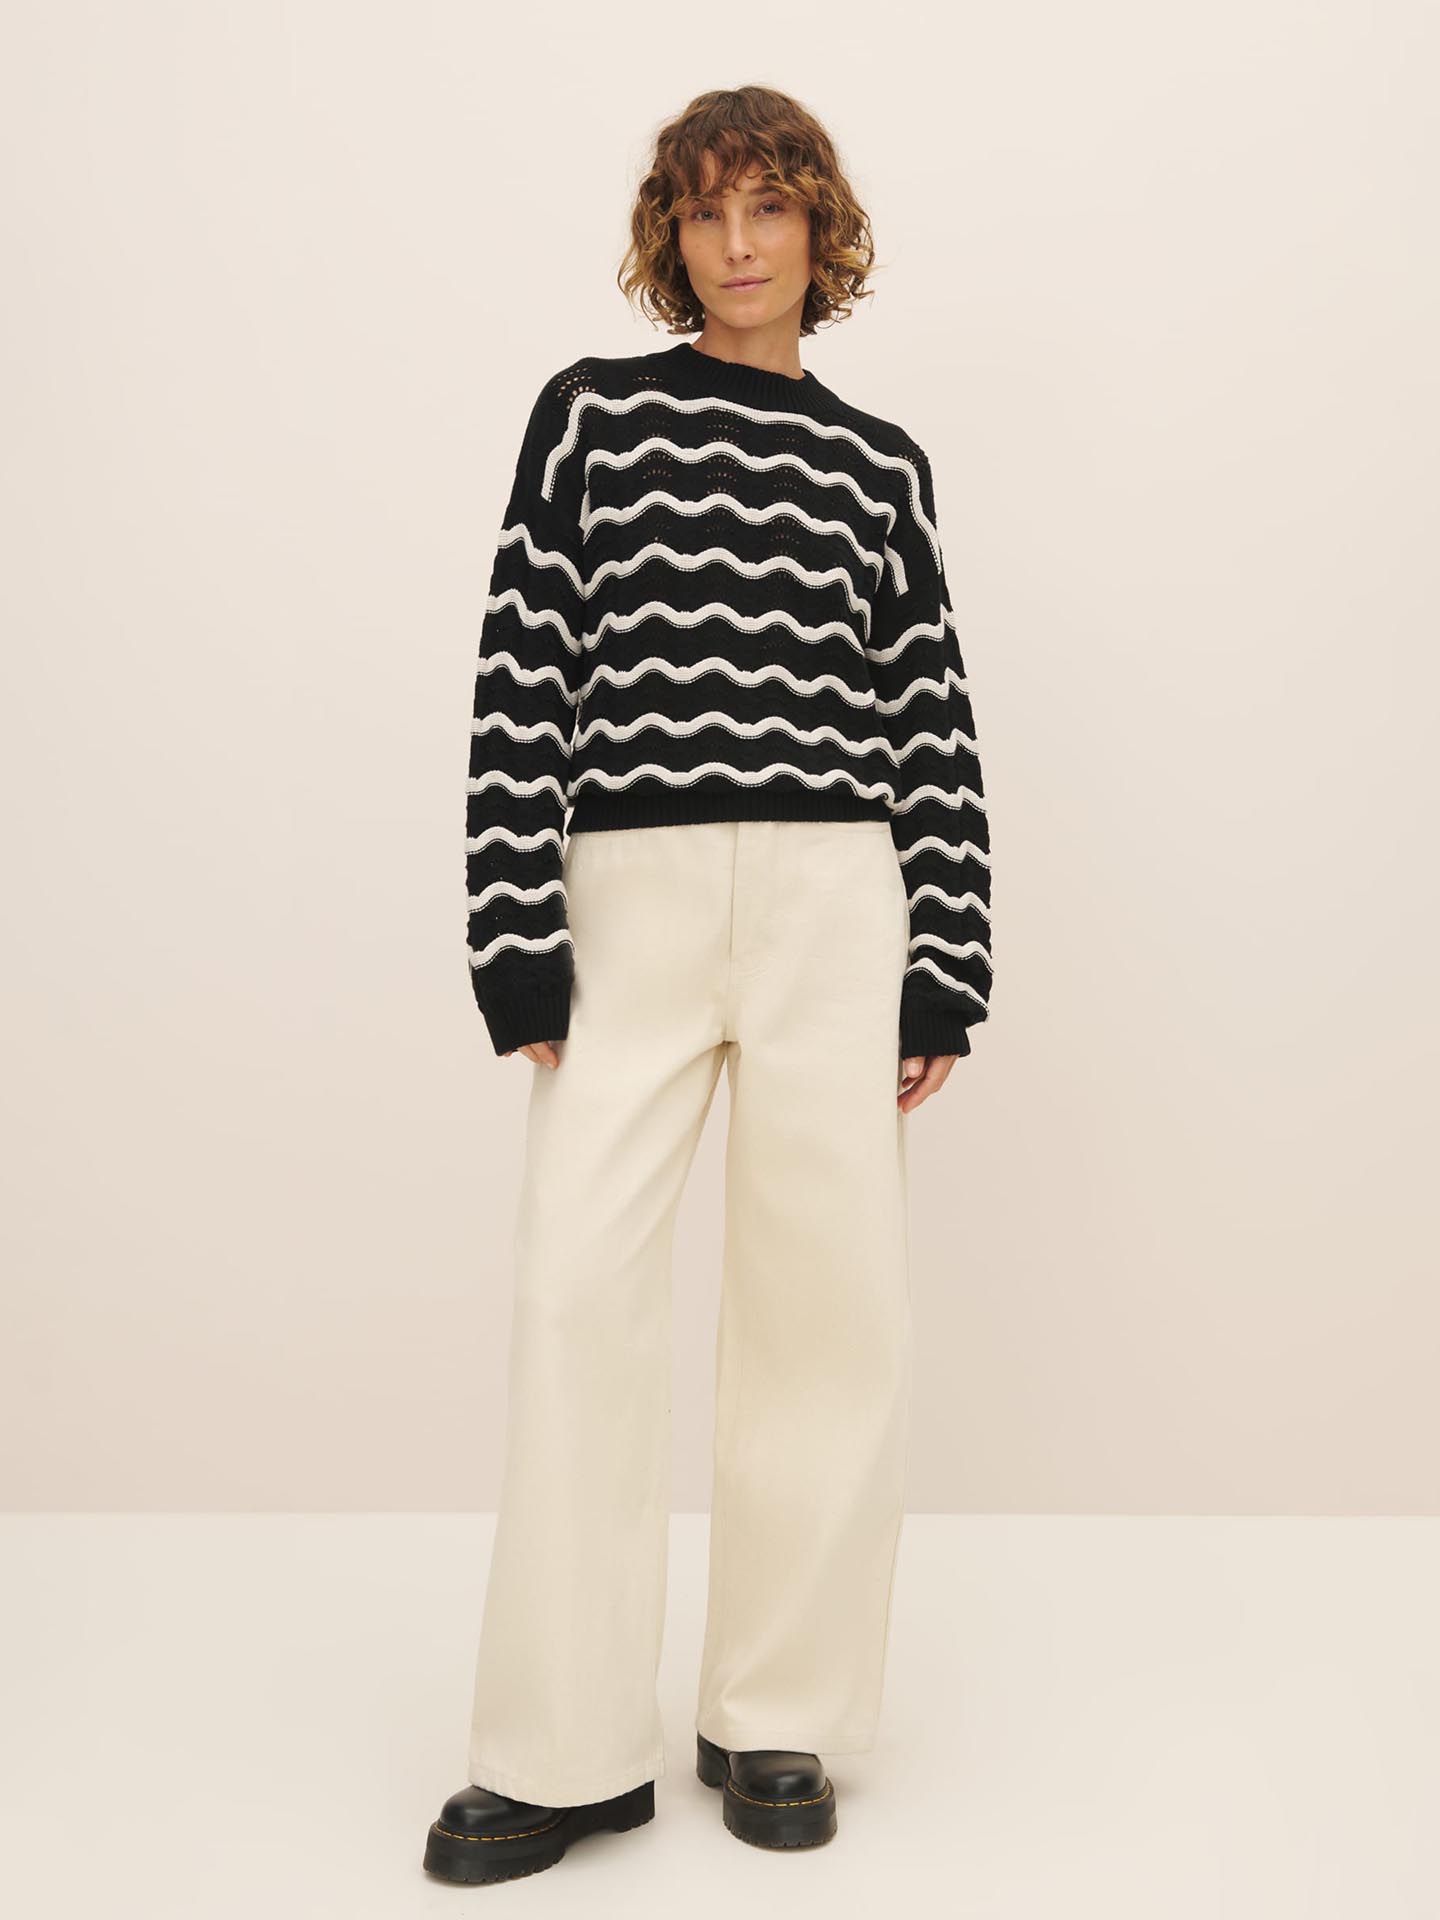 Woman posing in a Tide Jumper made from Fairtrade organic cotton by Kowtow, and white trousers.